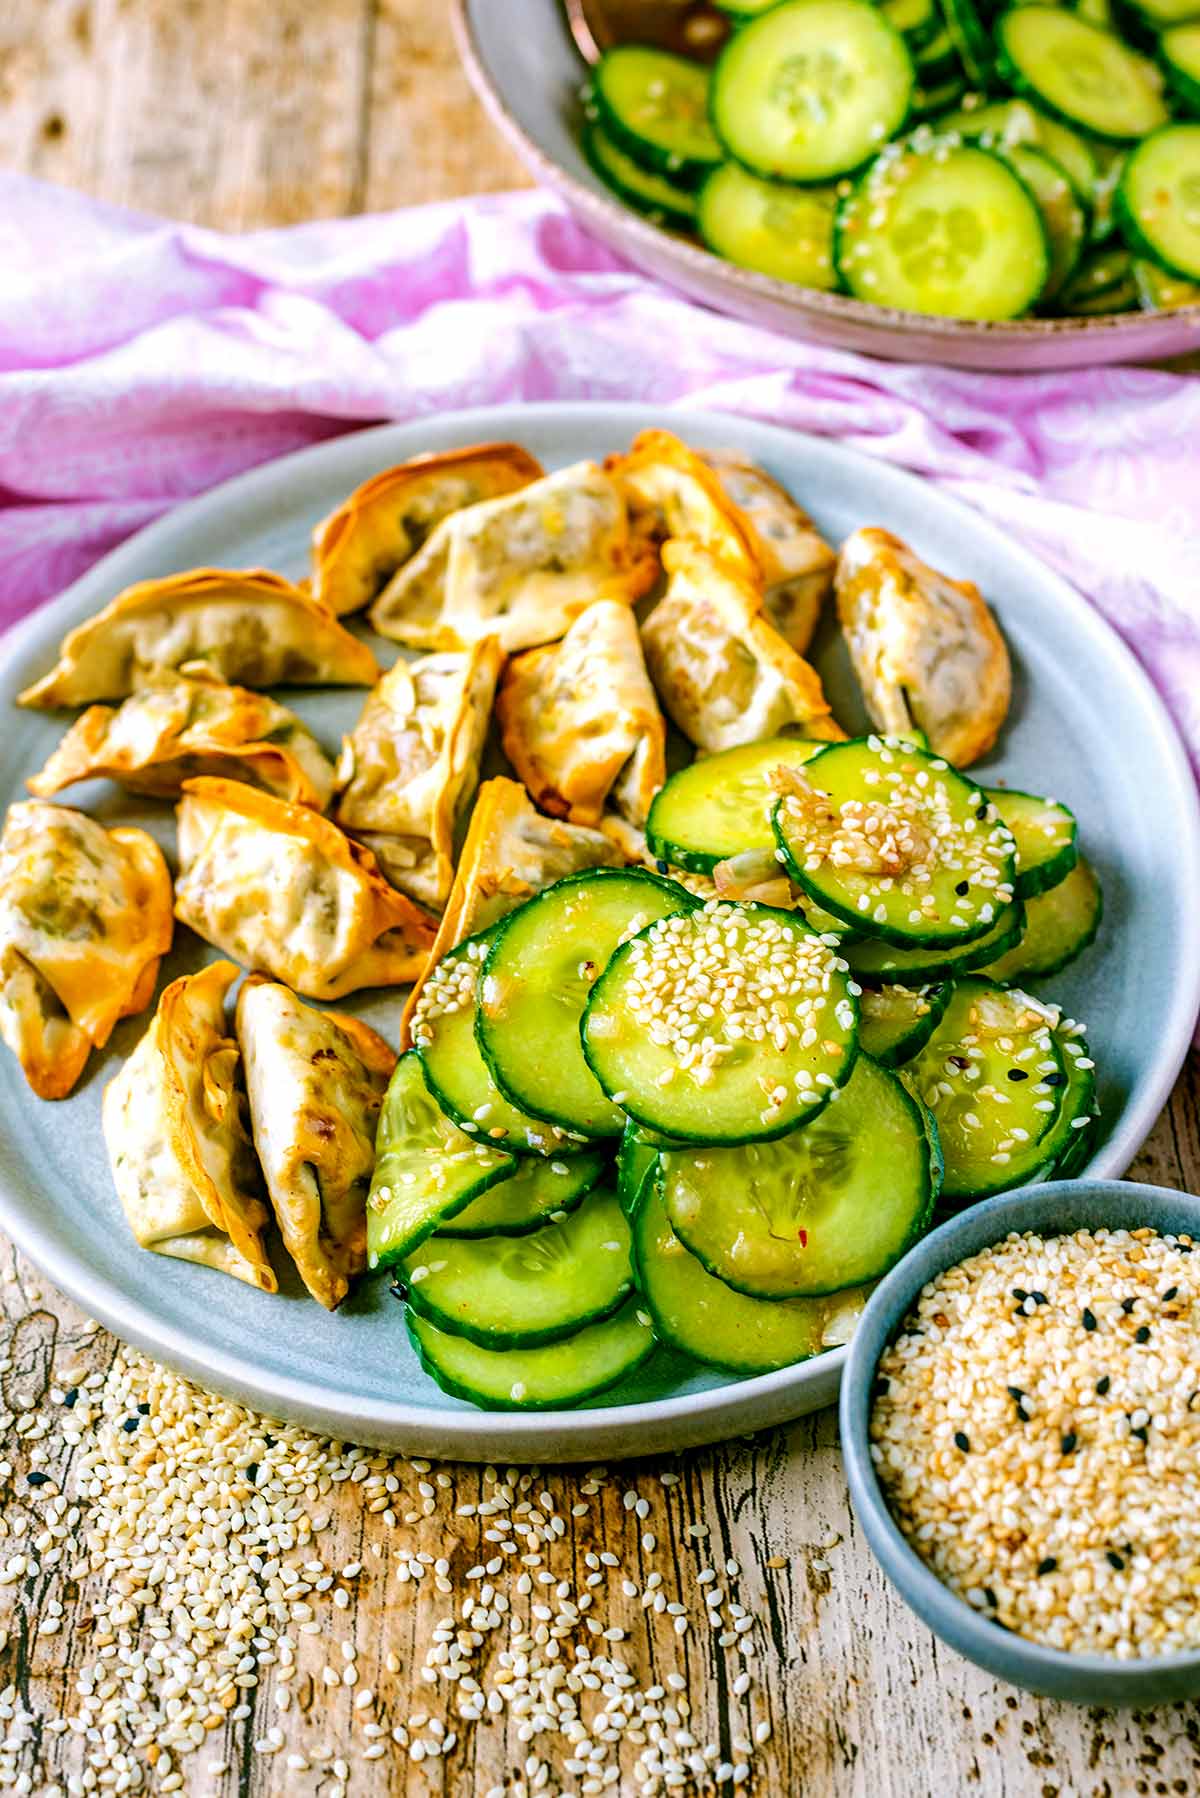 Cucumber salad on a plate with some gyoza.